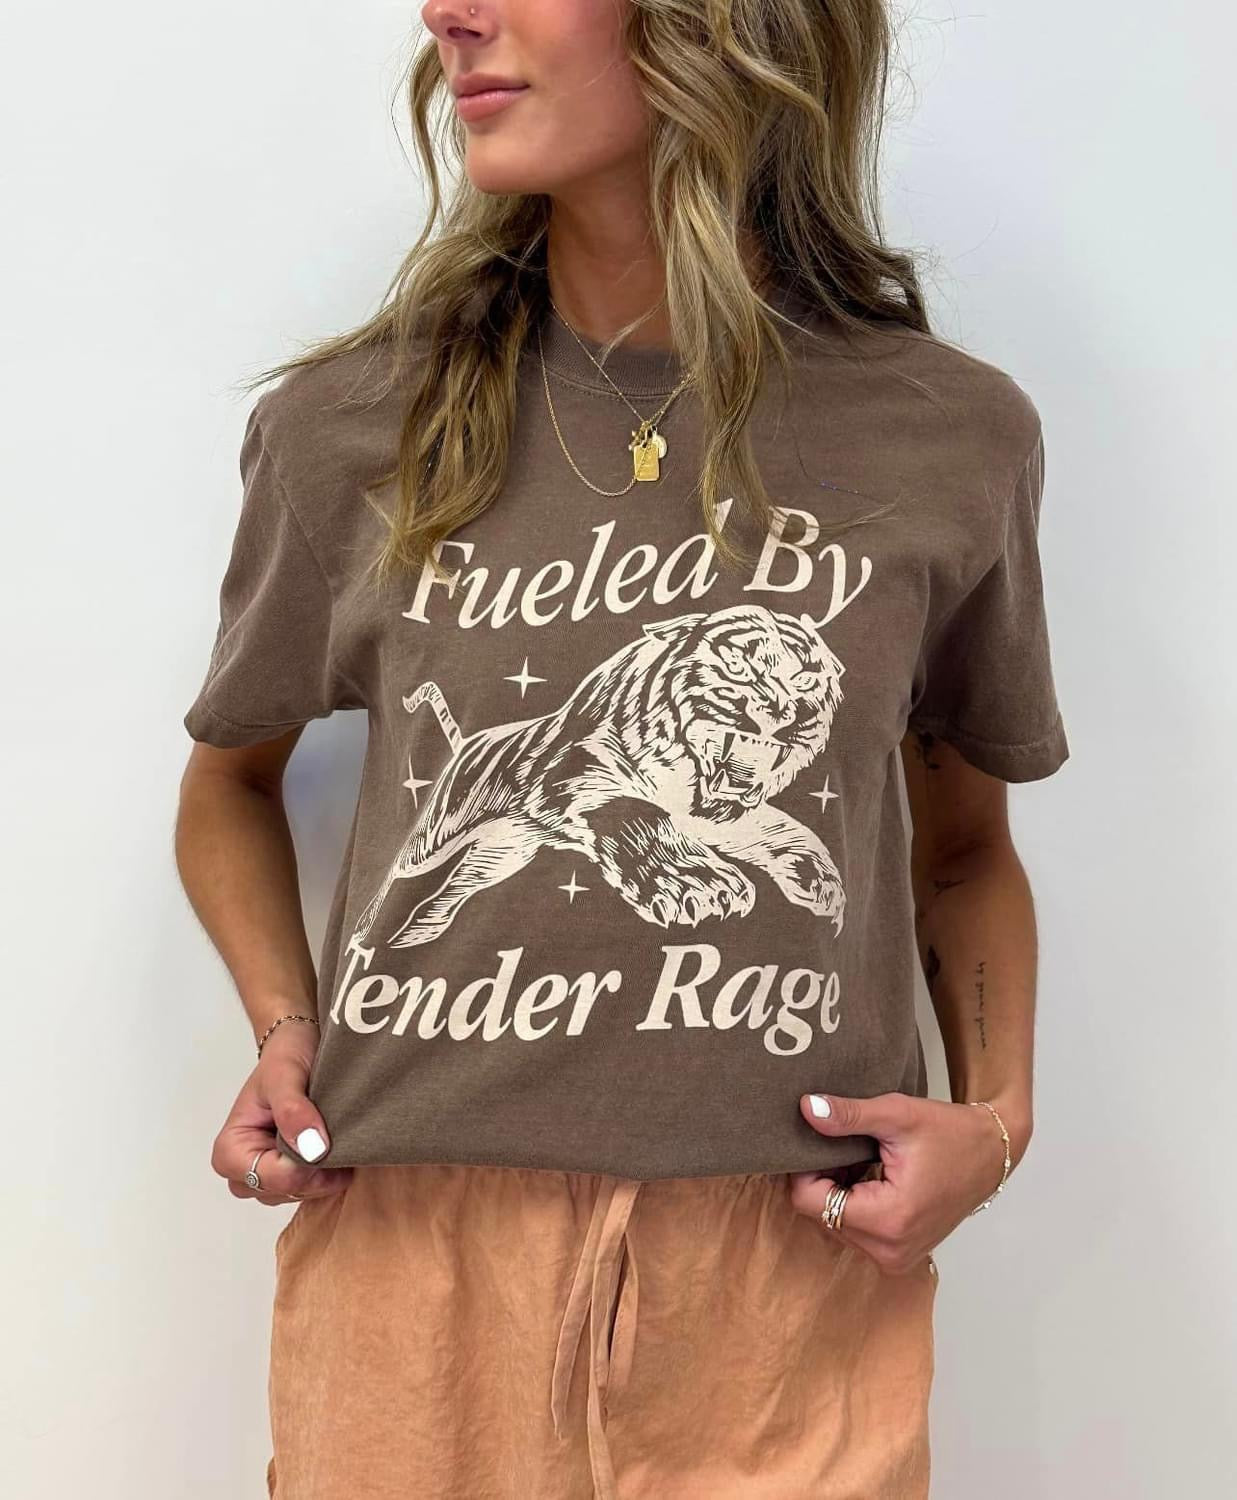 Fueled By Rage T-Shirt {Pre-Order} Closes 4-22-24 @ Midnight.